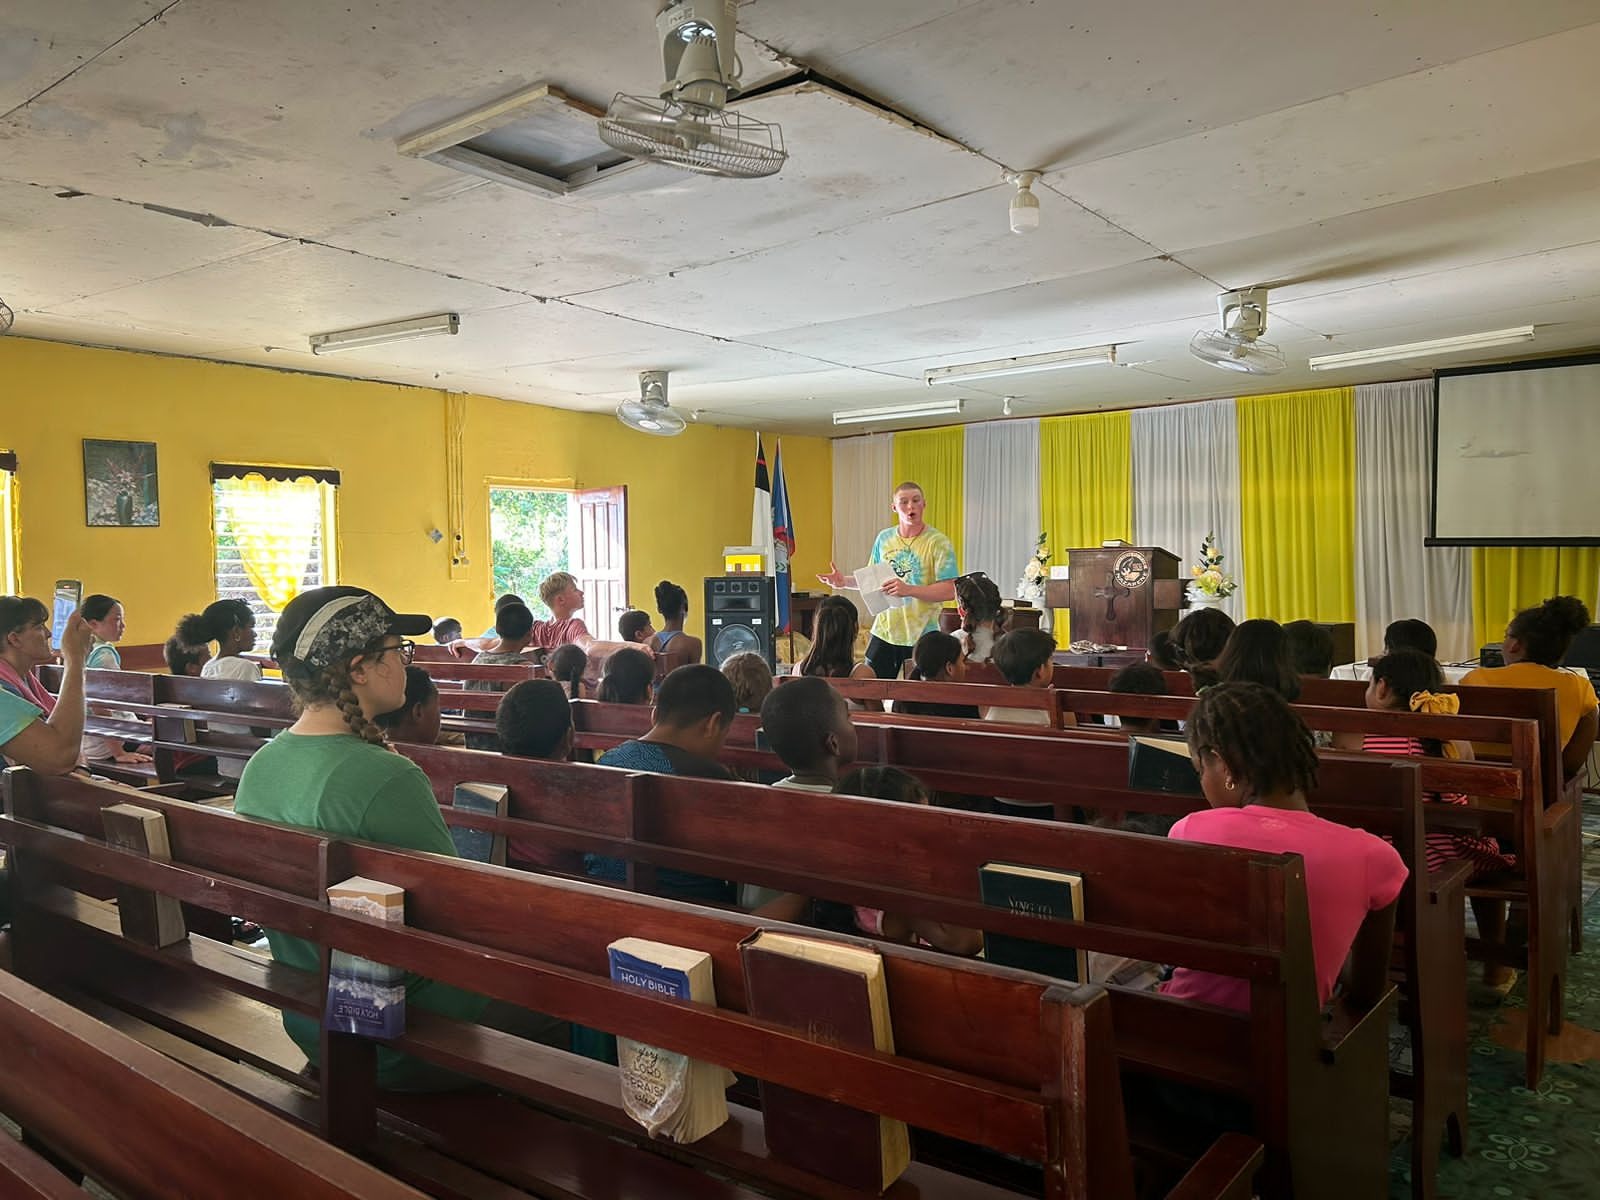 VBS: Sharing the Word of God